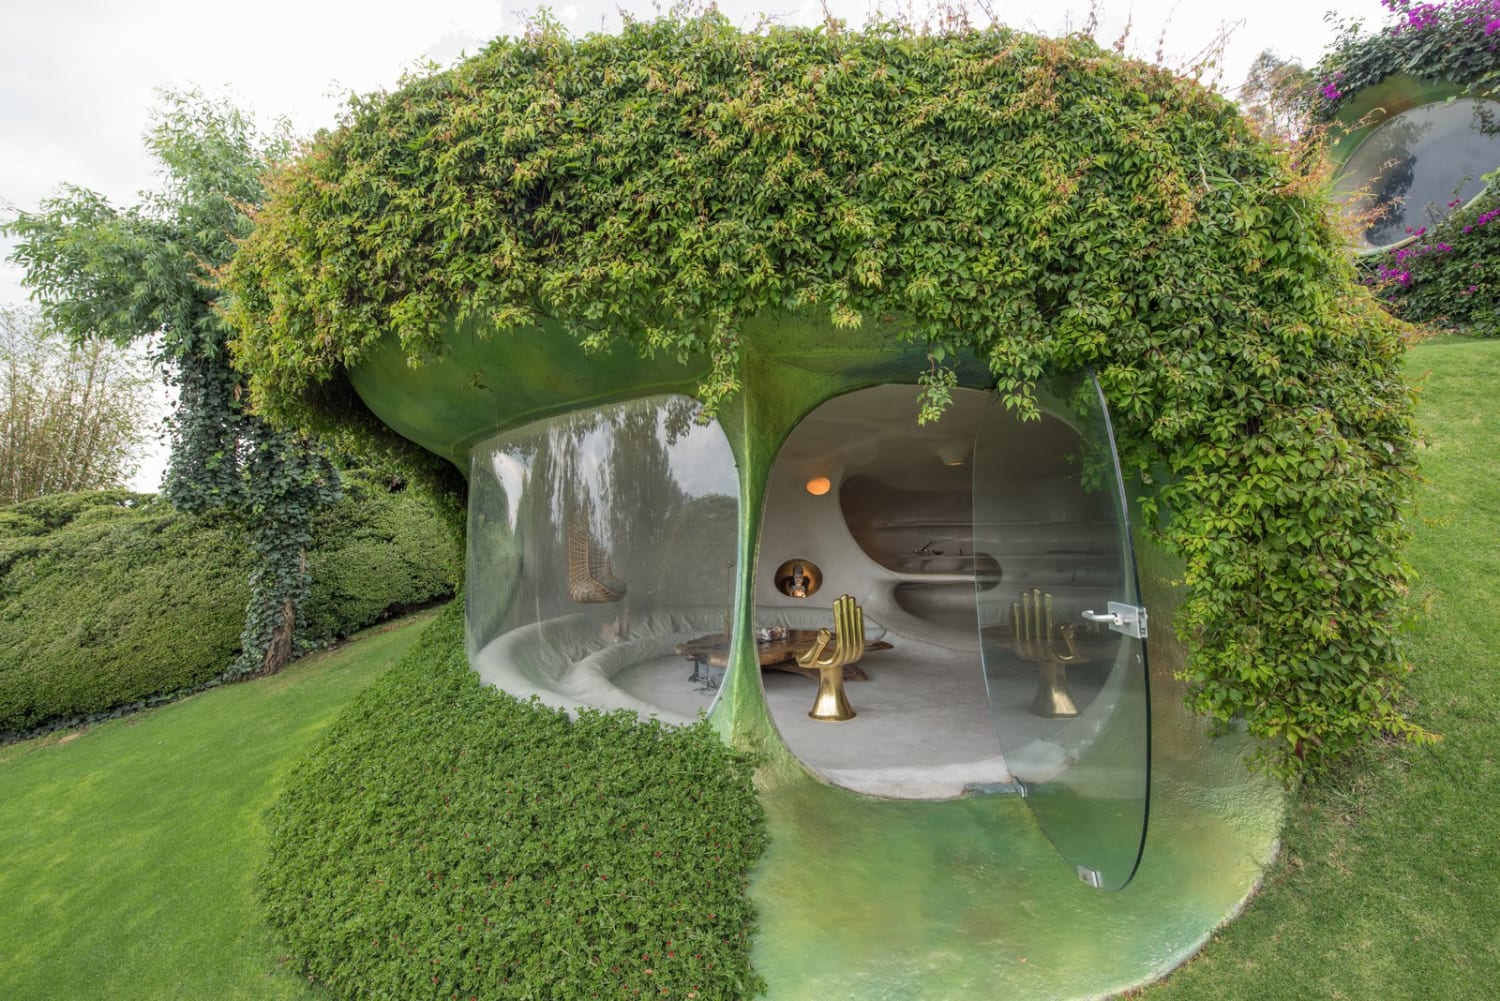 This Lush, Underground Home Is a Hideaway Fit For a Hobbit